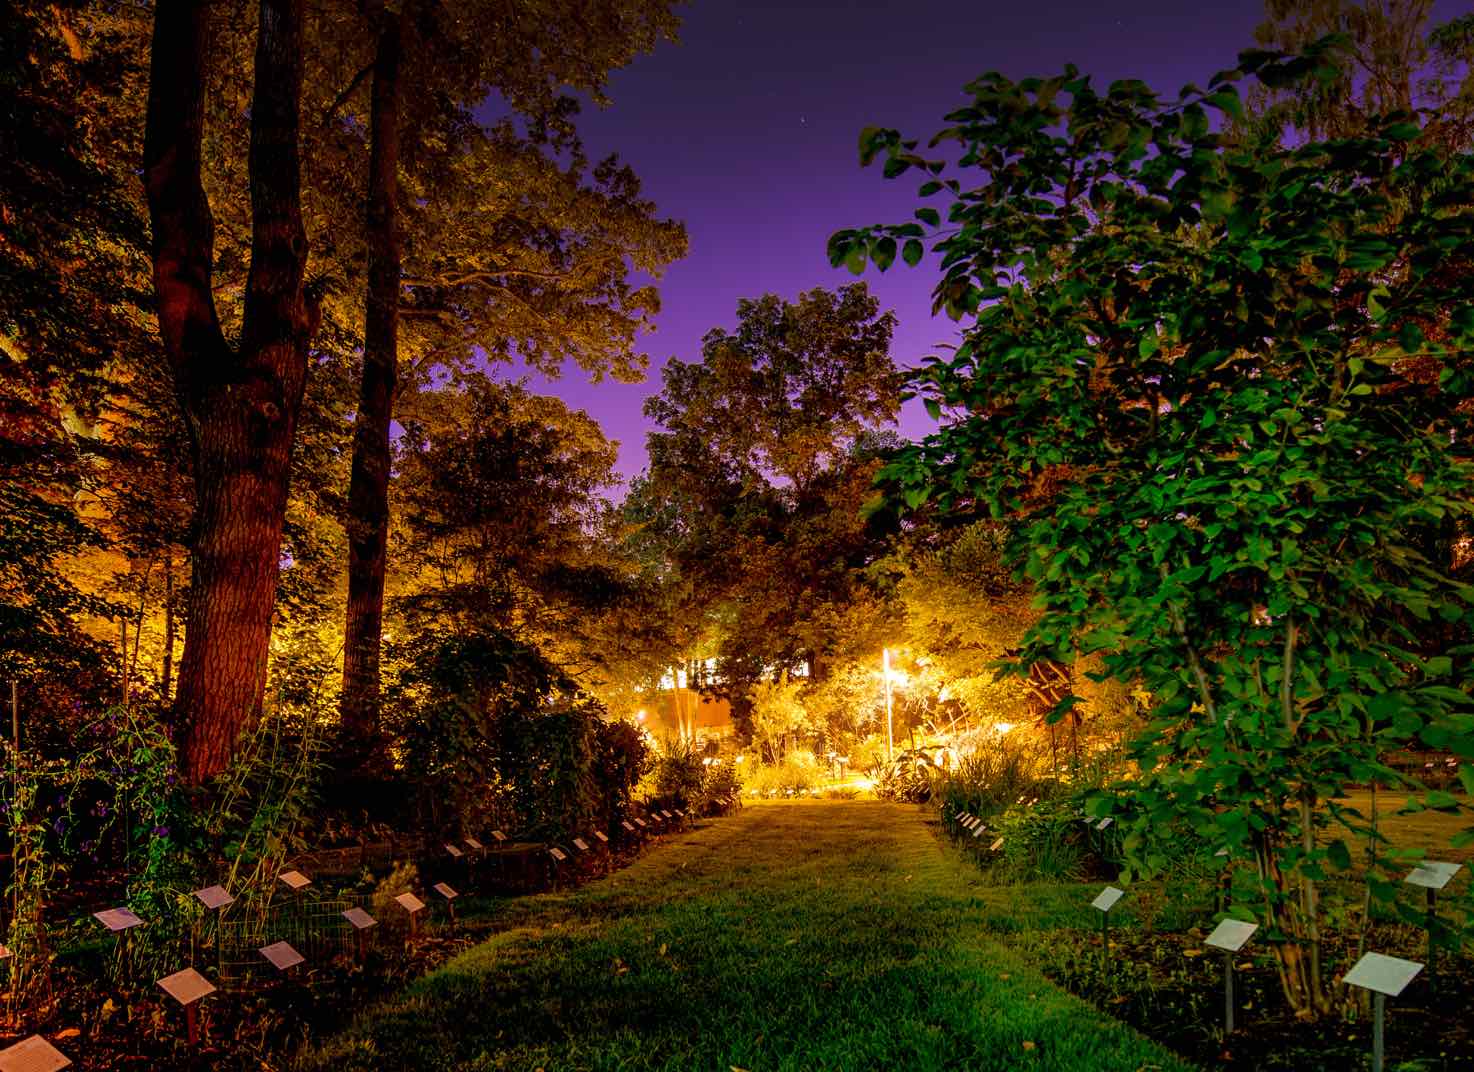 Beal Garden glows with a pink and purple sky